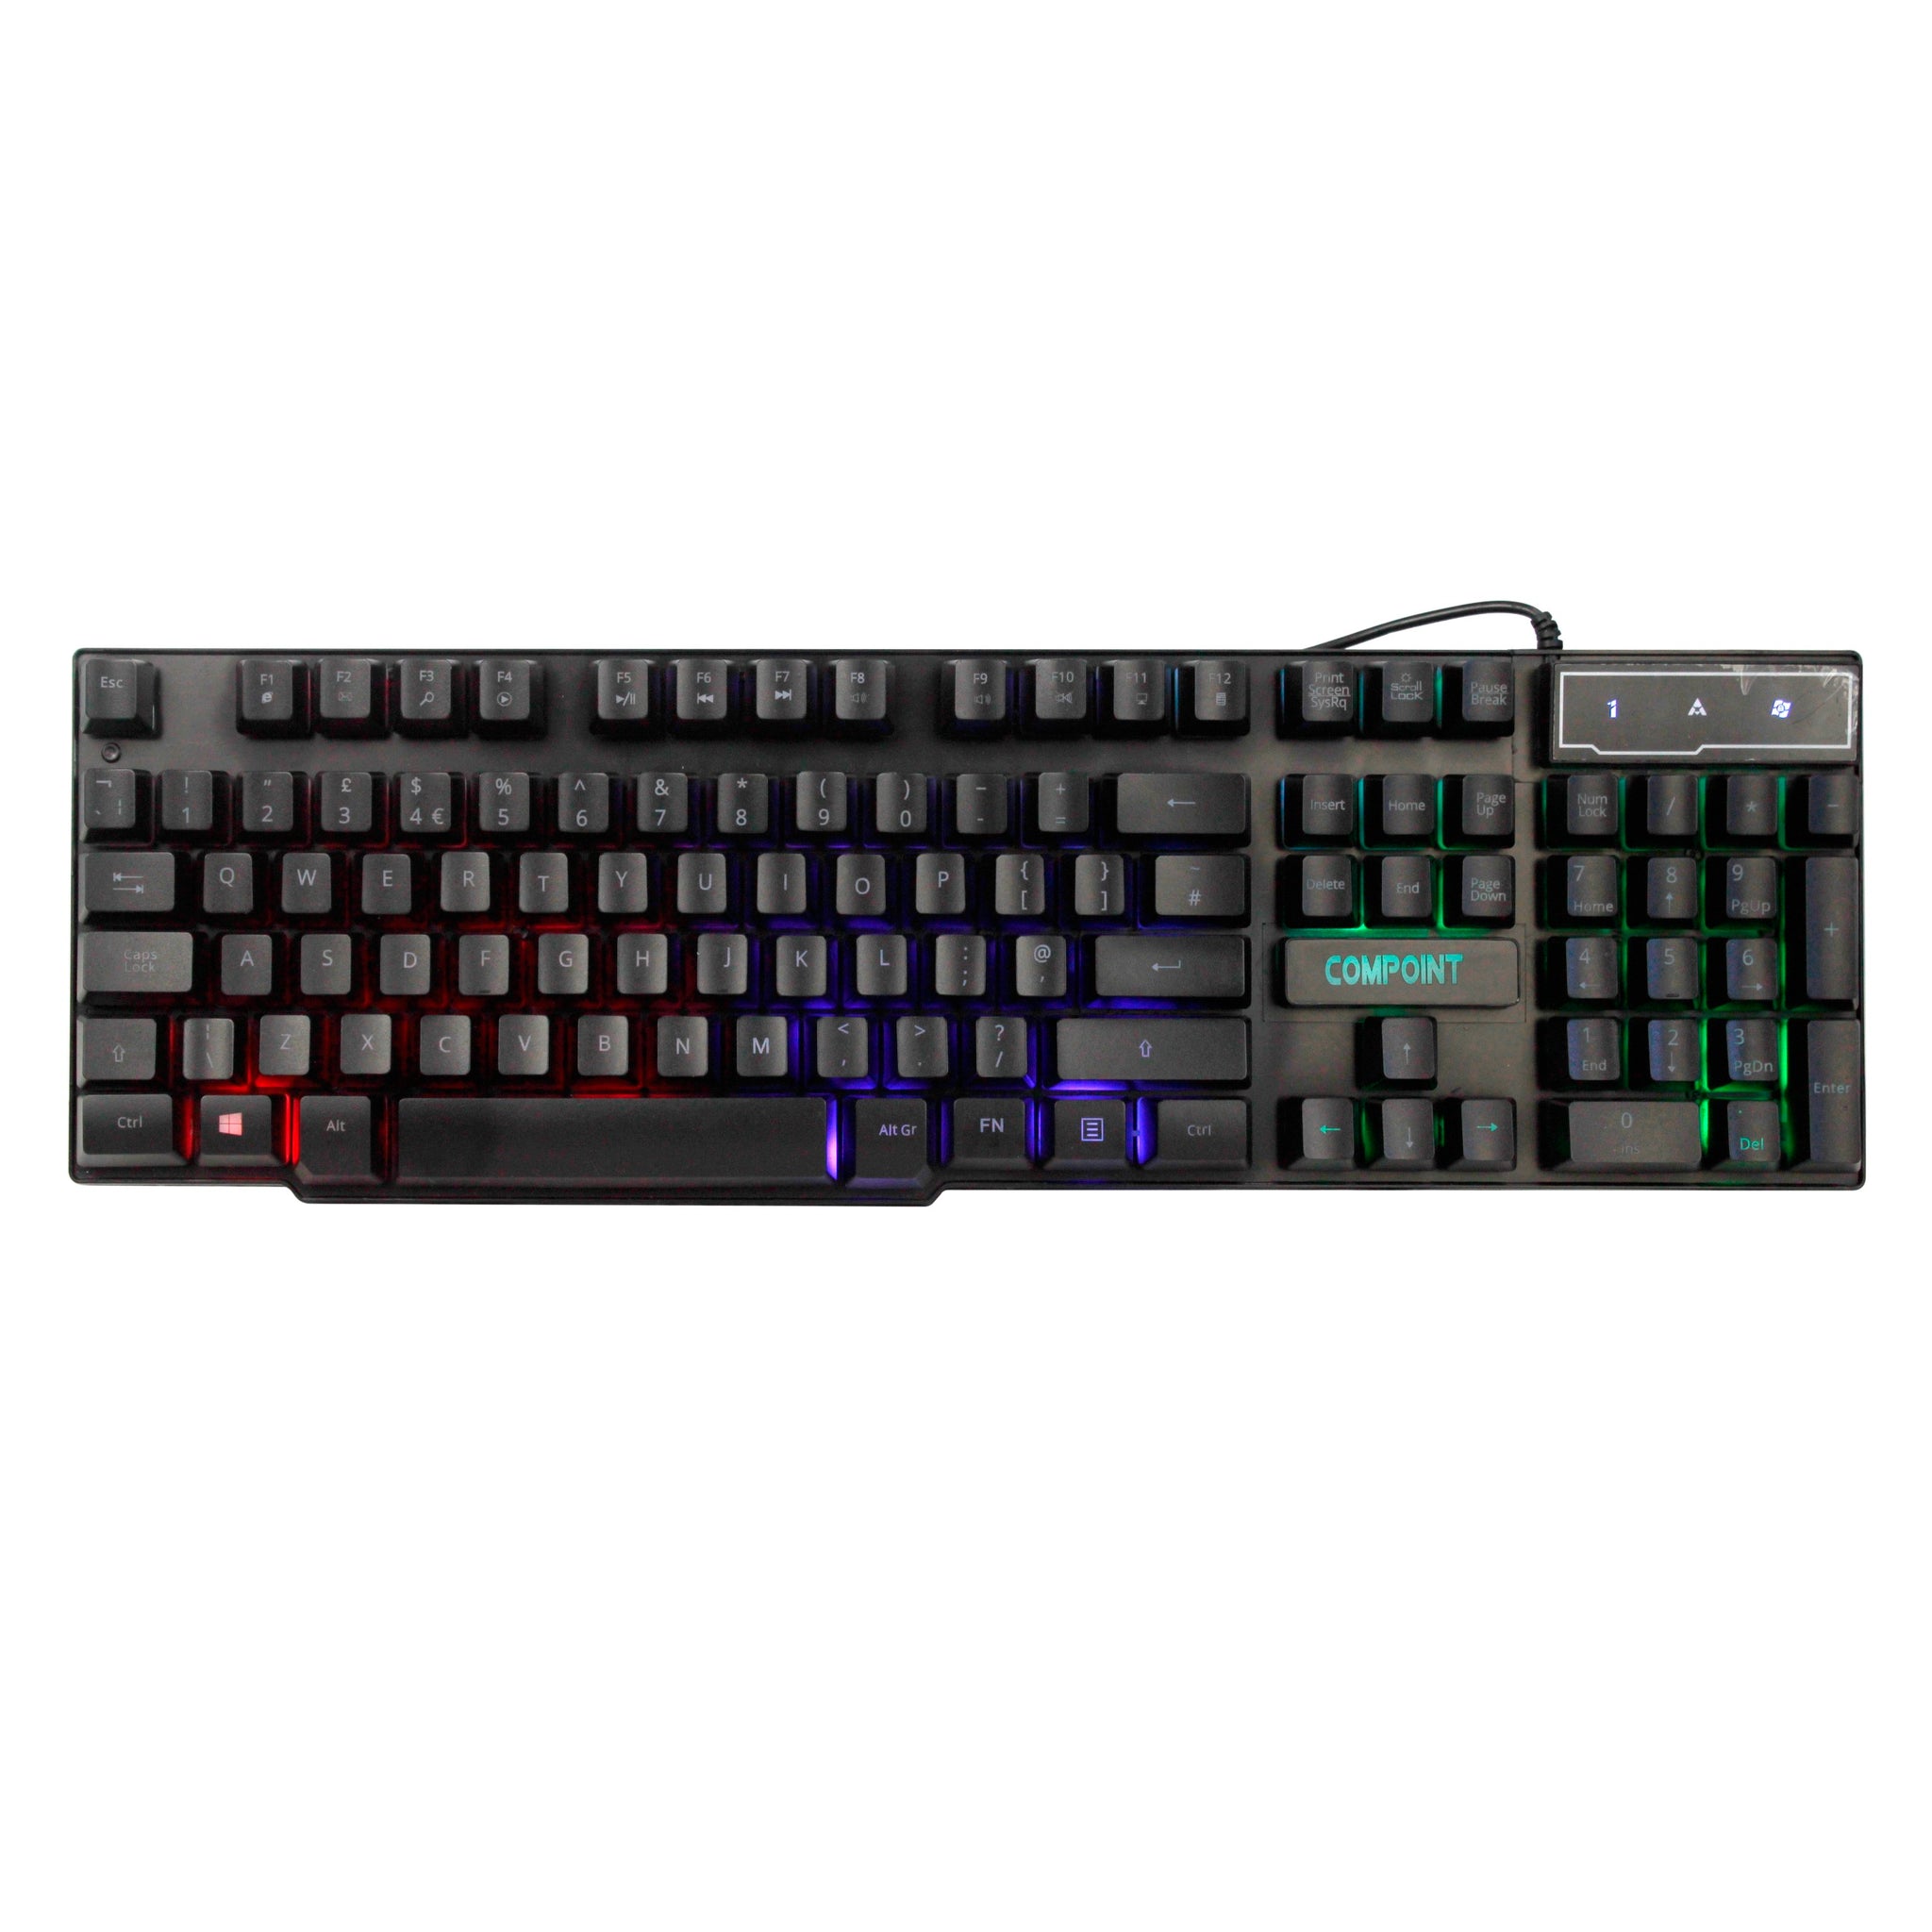 4 in 1 Gaming Set: LED Q-Keyboard, LED Mouse, Gaming Headset, Non-Slip Mouse Pad (CP-KMH018)